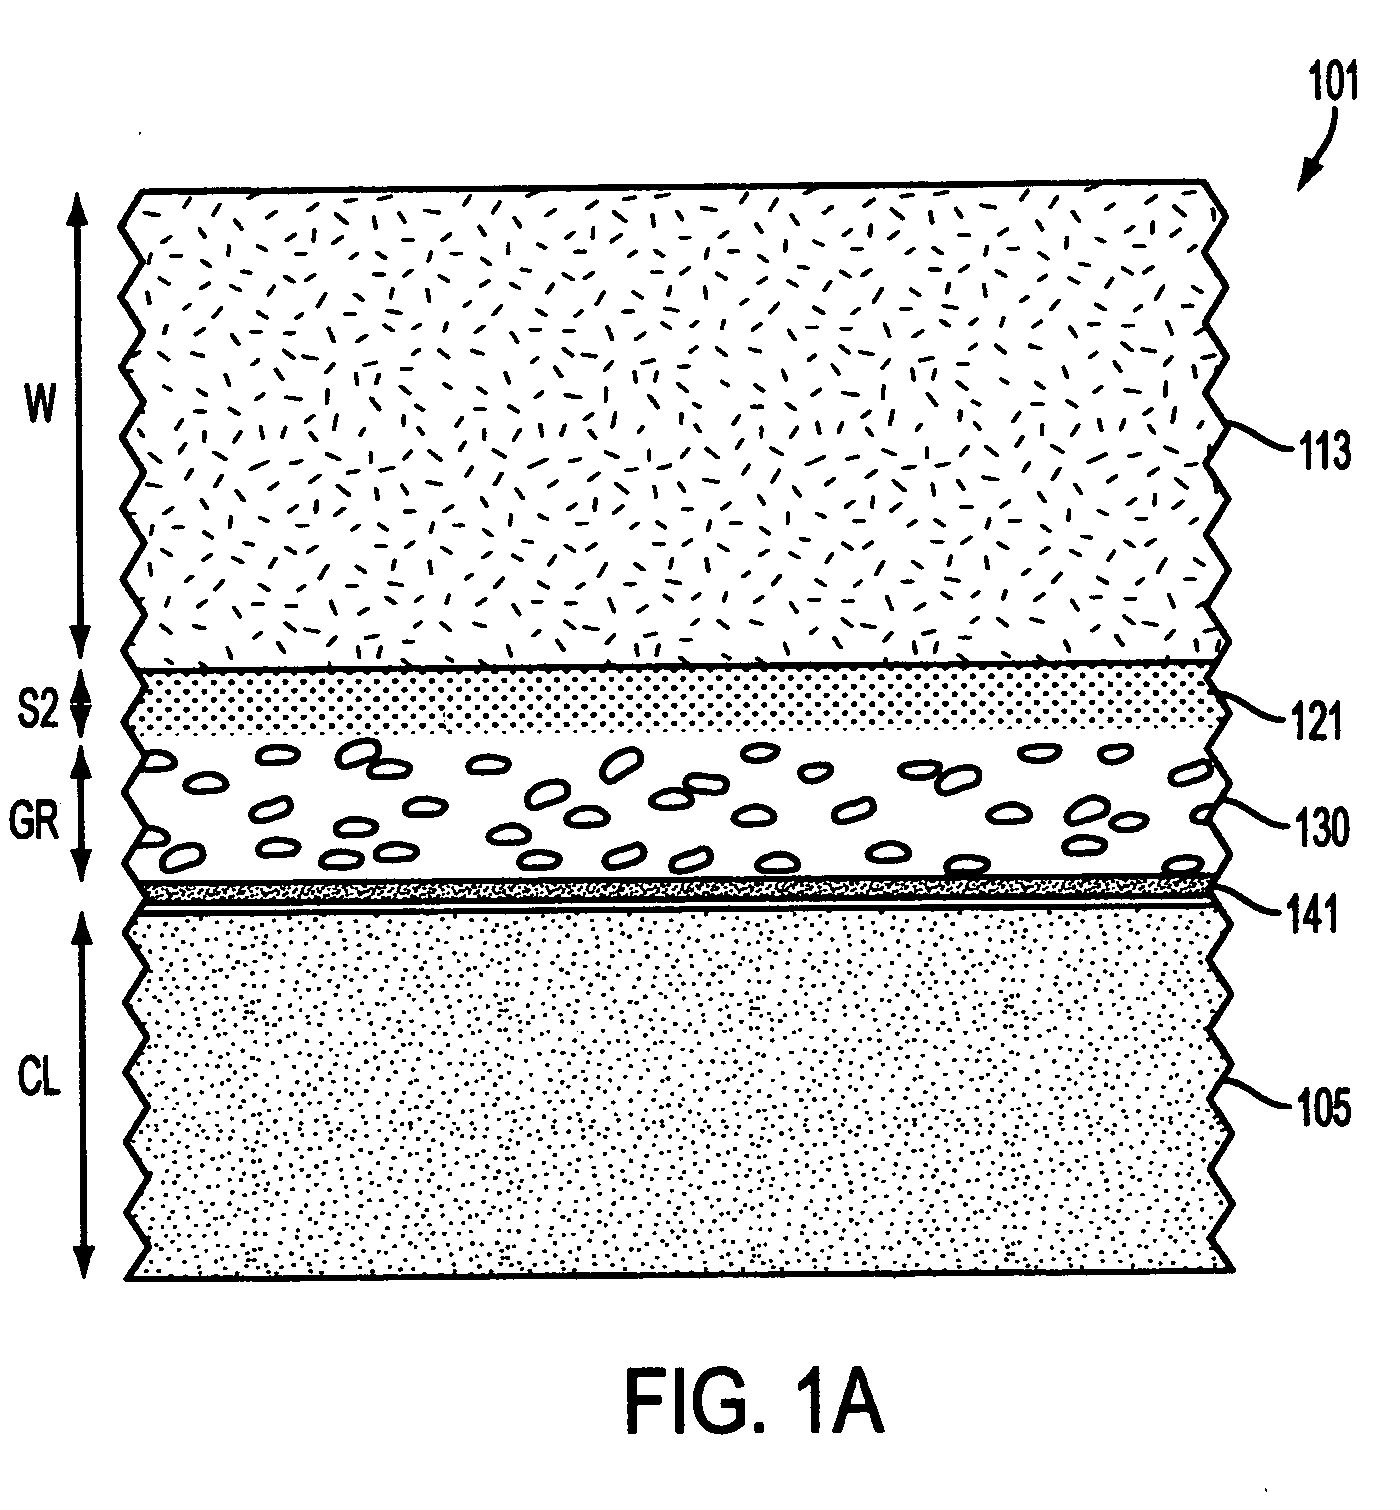 Void-maintaining synthetic drainable base courses in landfills and other large structures, and methods for controlling the flow and evacuation of fluids from landifills